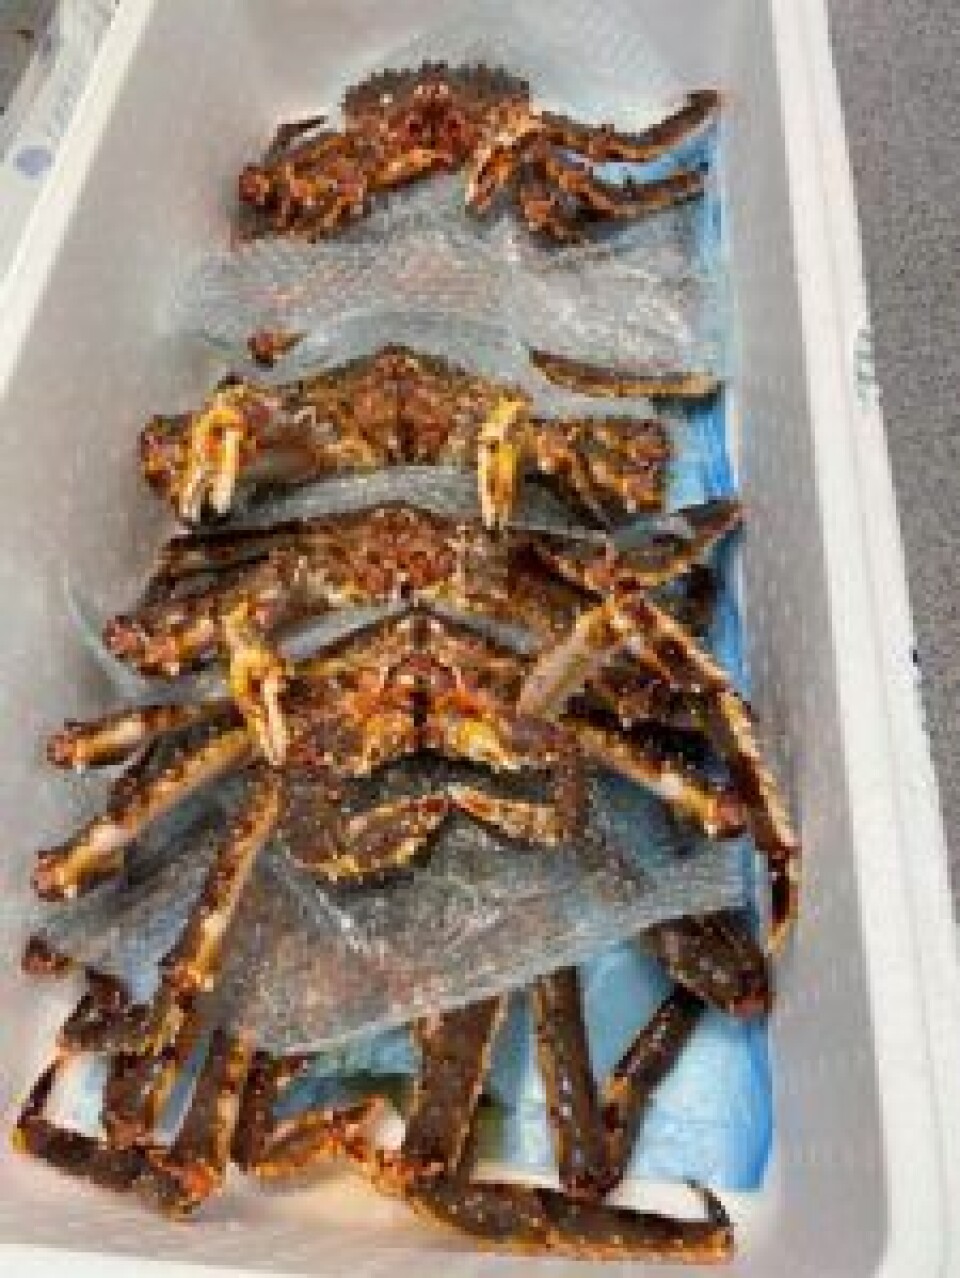 Nofima's Crab is King project focuses on precisely how to rear small crabs from 250 grams up to a marketable size.